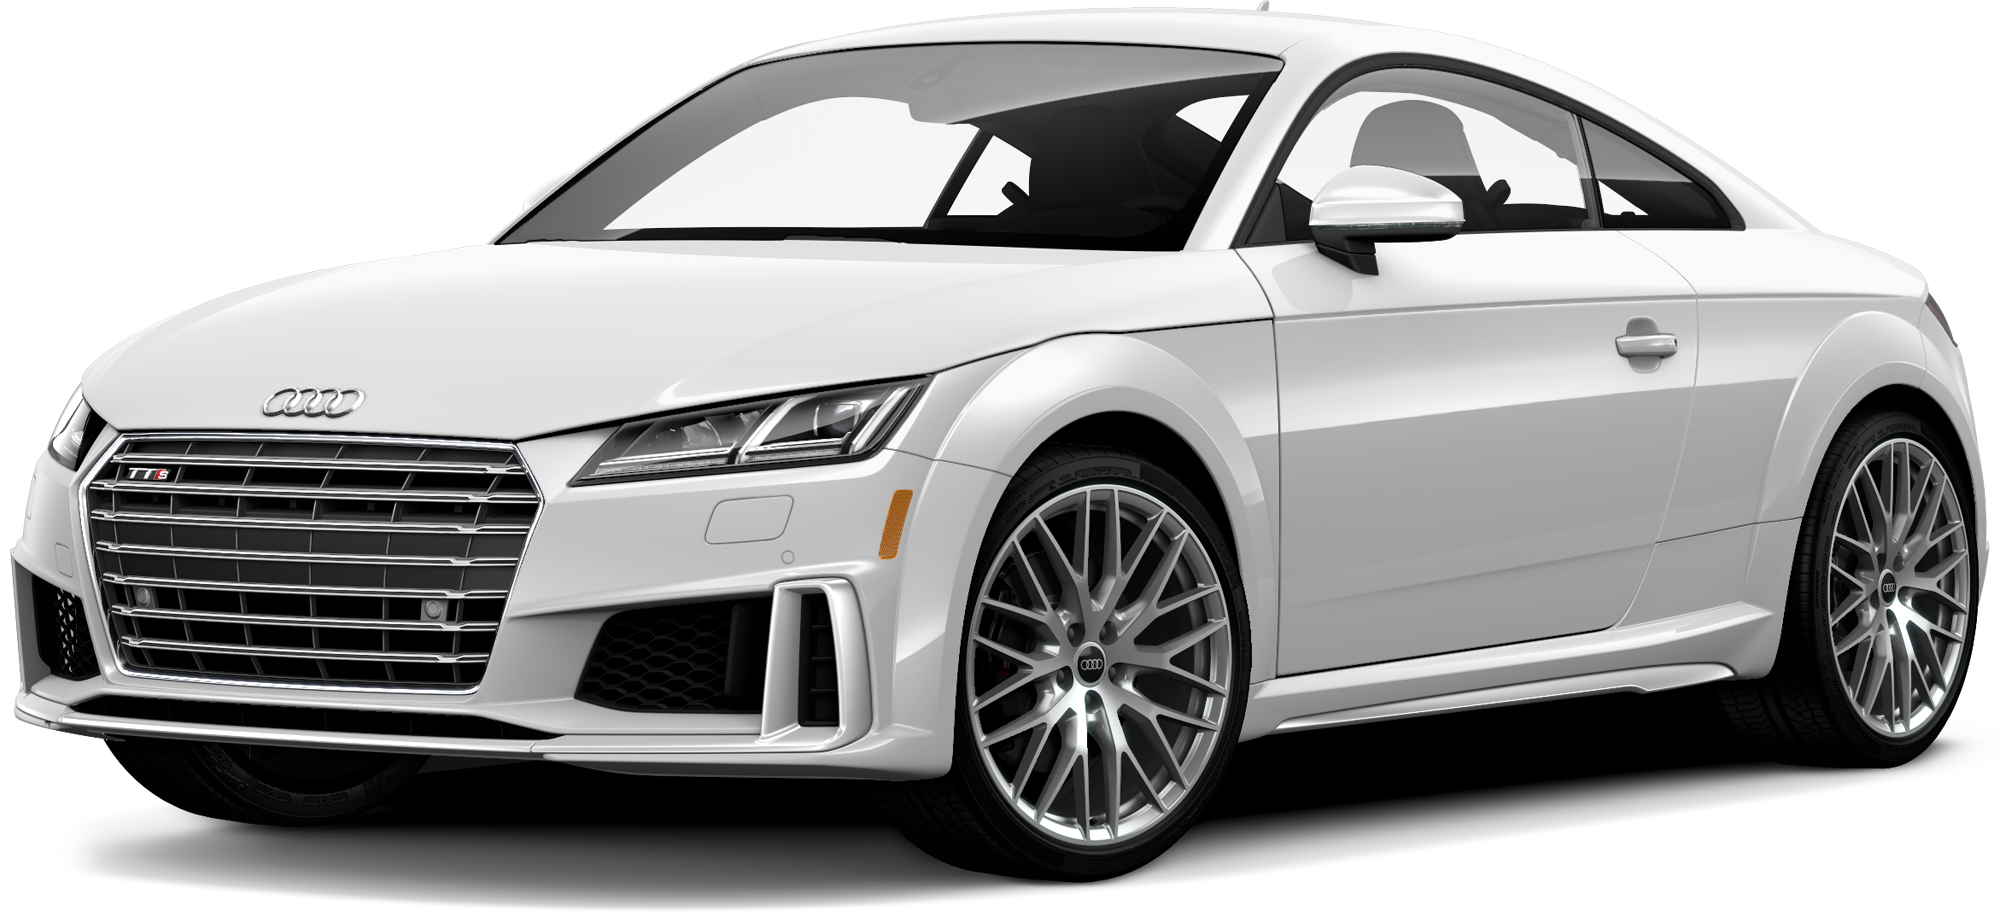 2021 Audi TTS Incentives, Specials & Offers in Salt Lake City UT